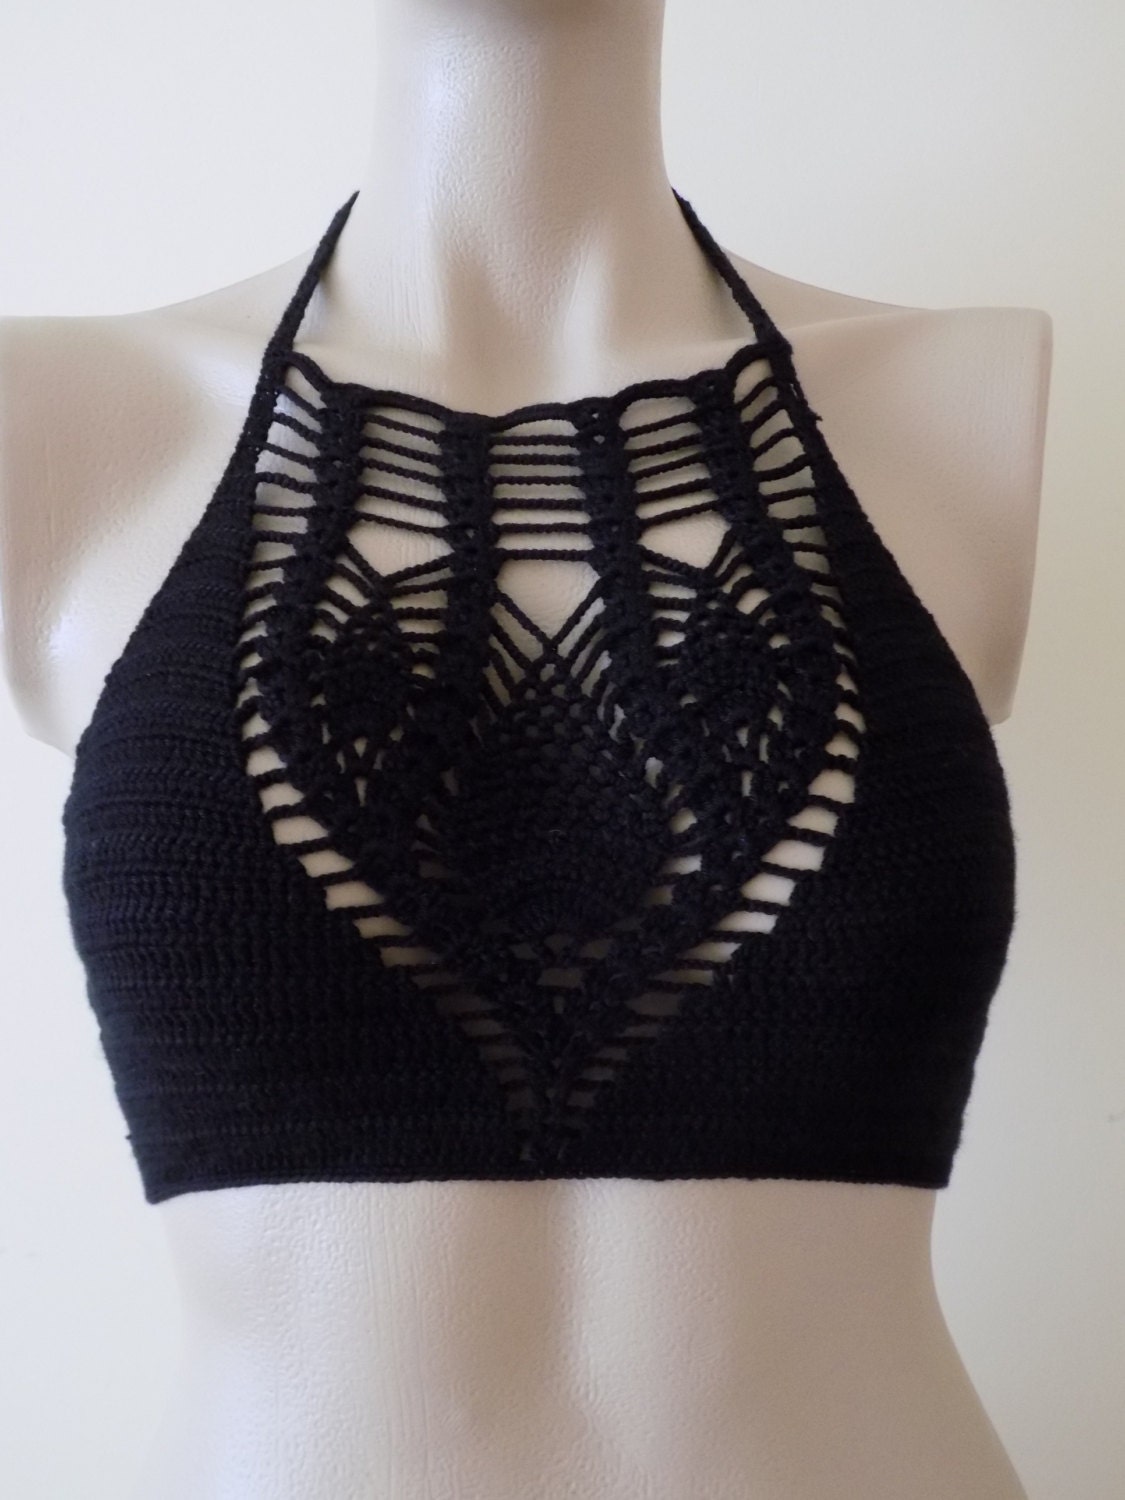 EXPRESS SHIPPING Black Top black halter by cheerfulboutique